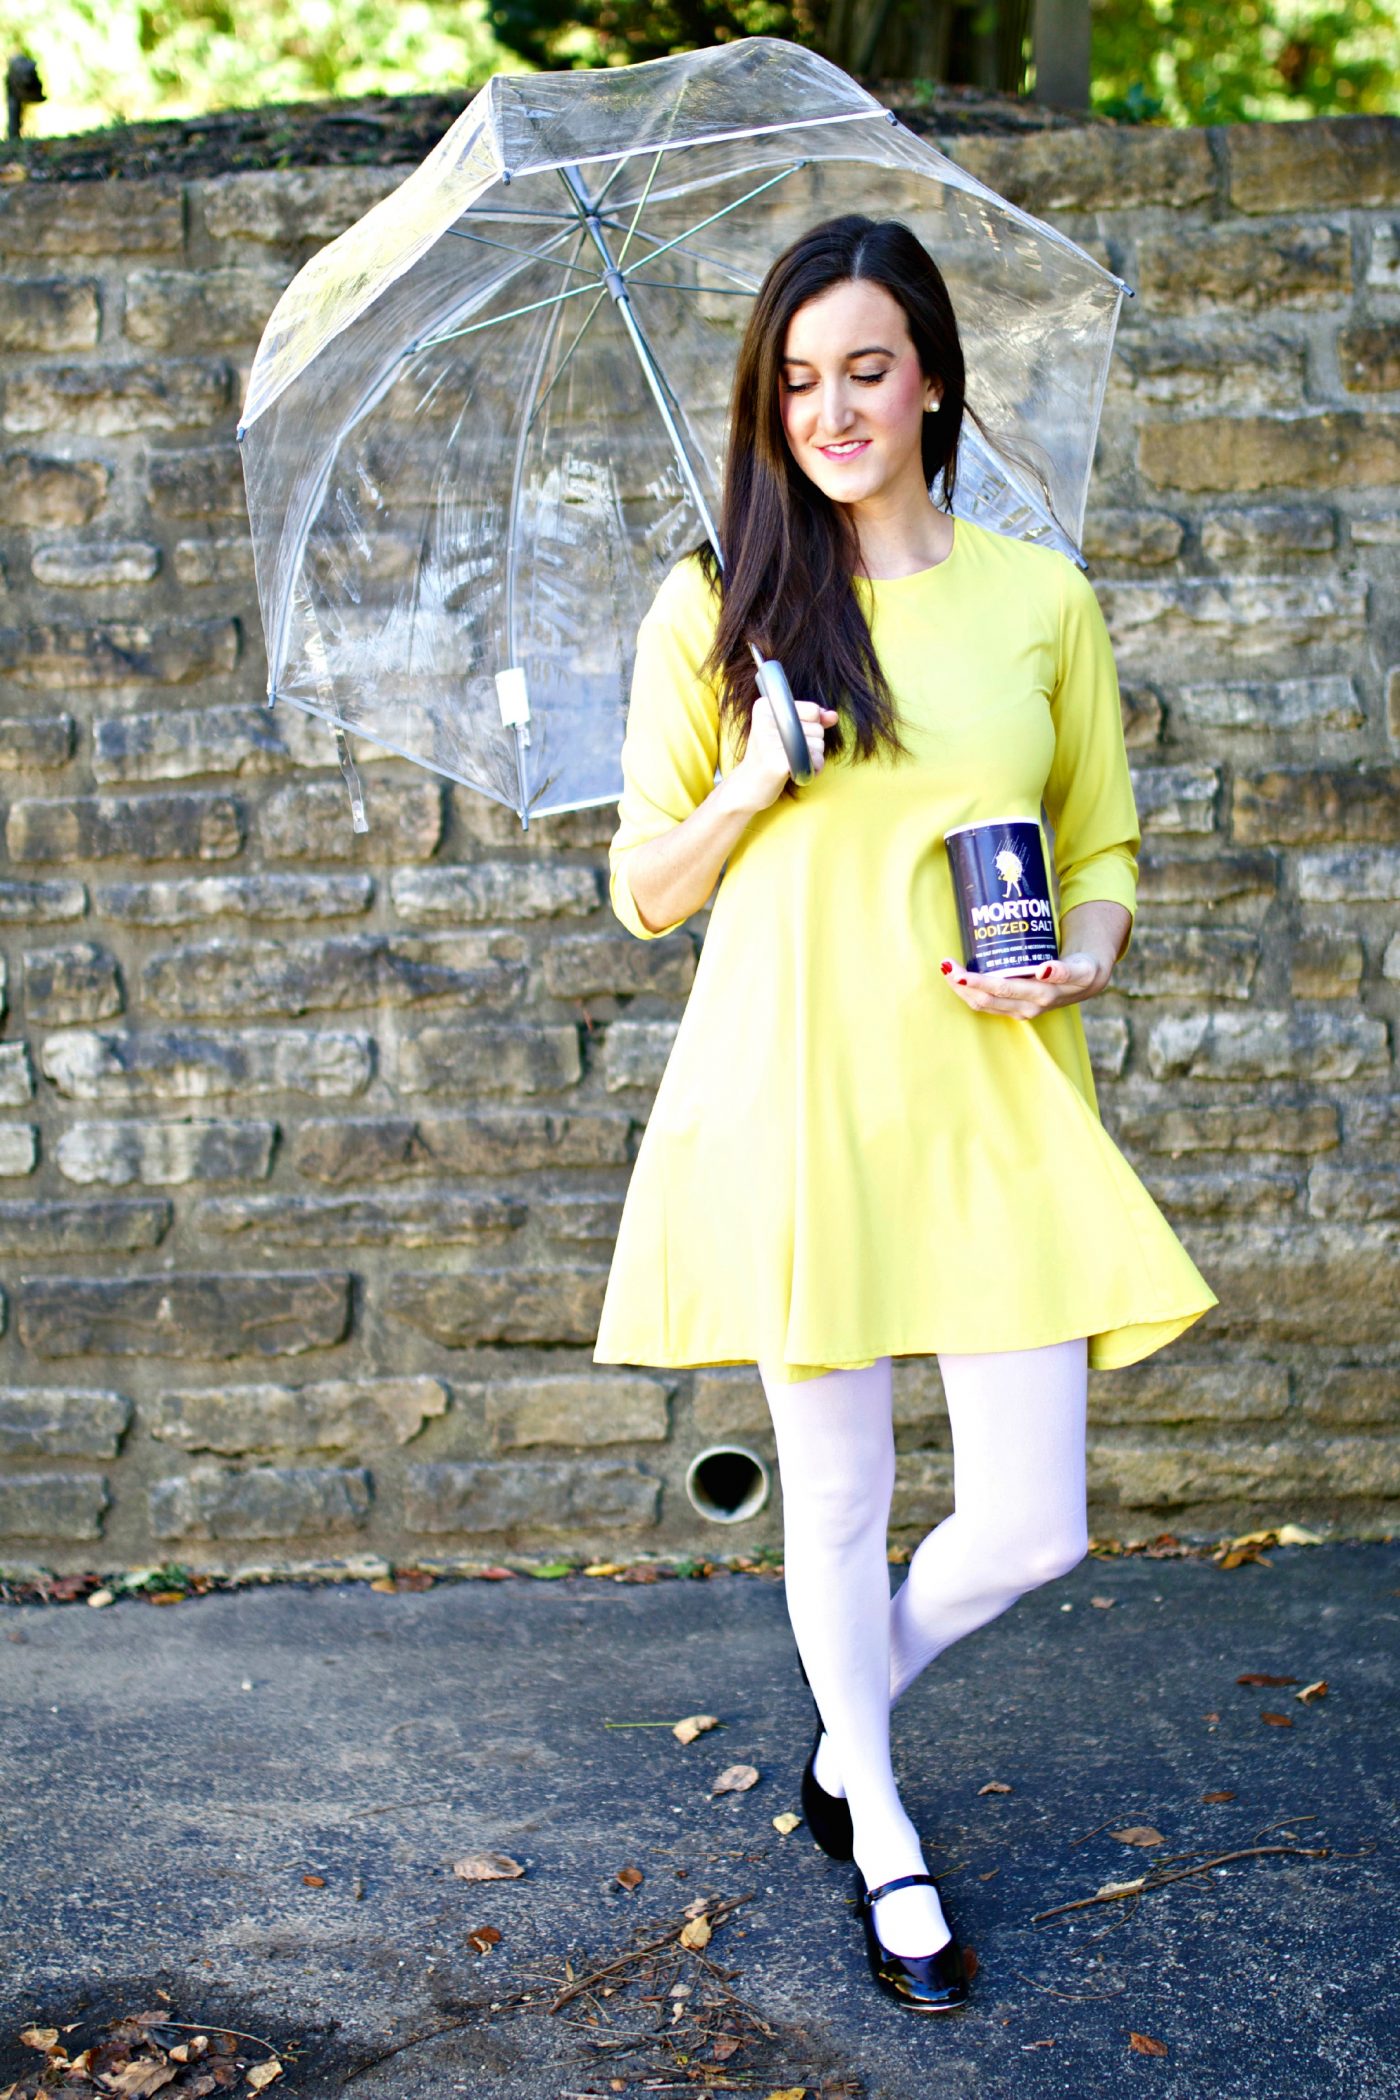 Woman wearing a yellow dress and holding an umbrella with a Morton salt container.